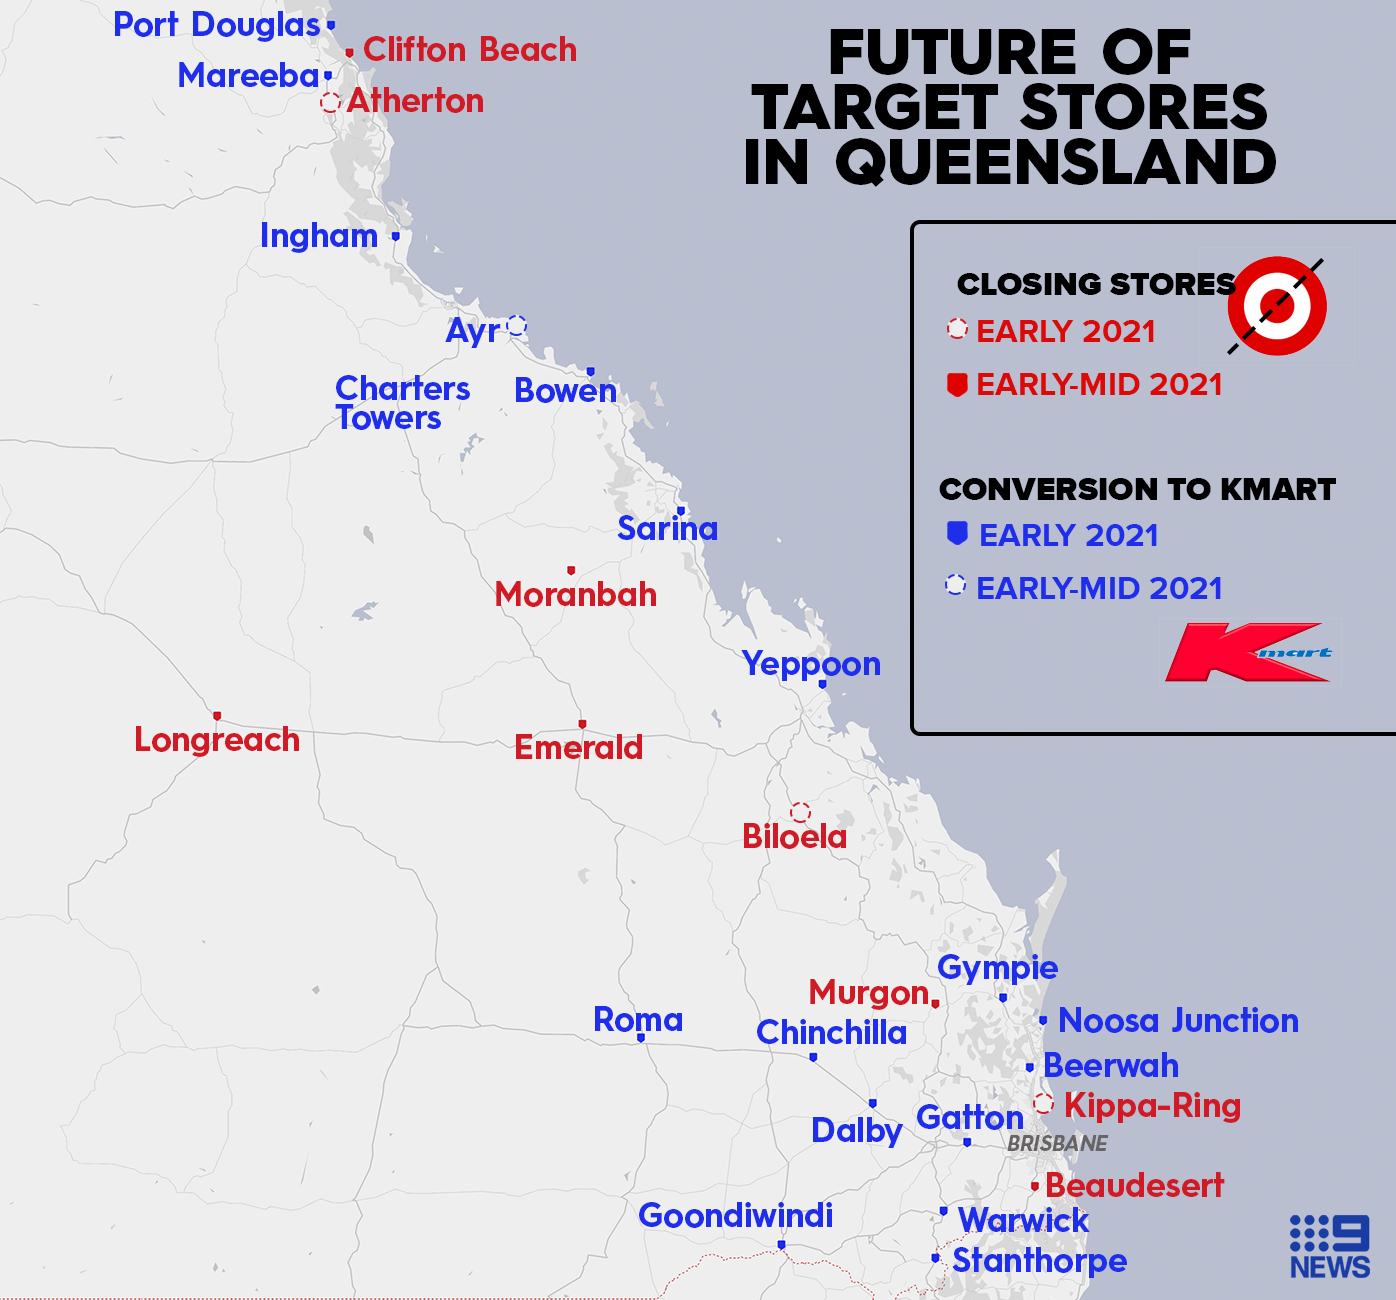 Target Australia: Store closures and conversions to Kmart explained